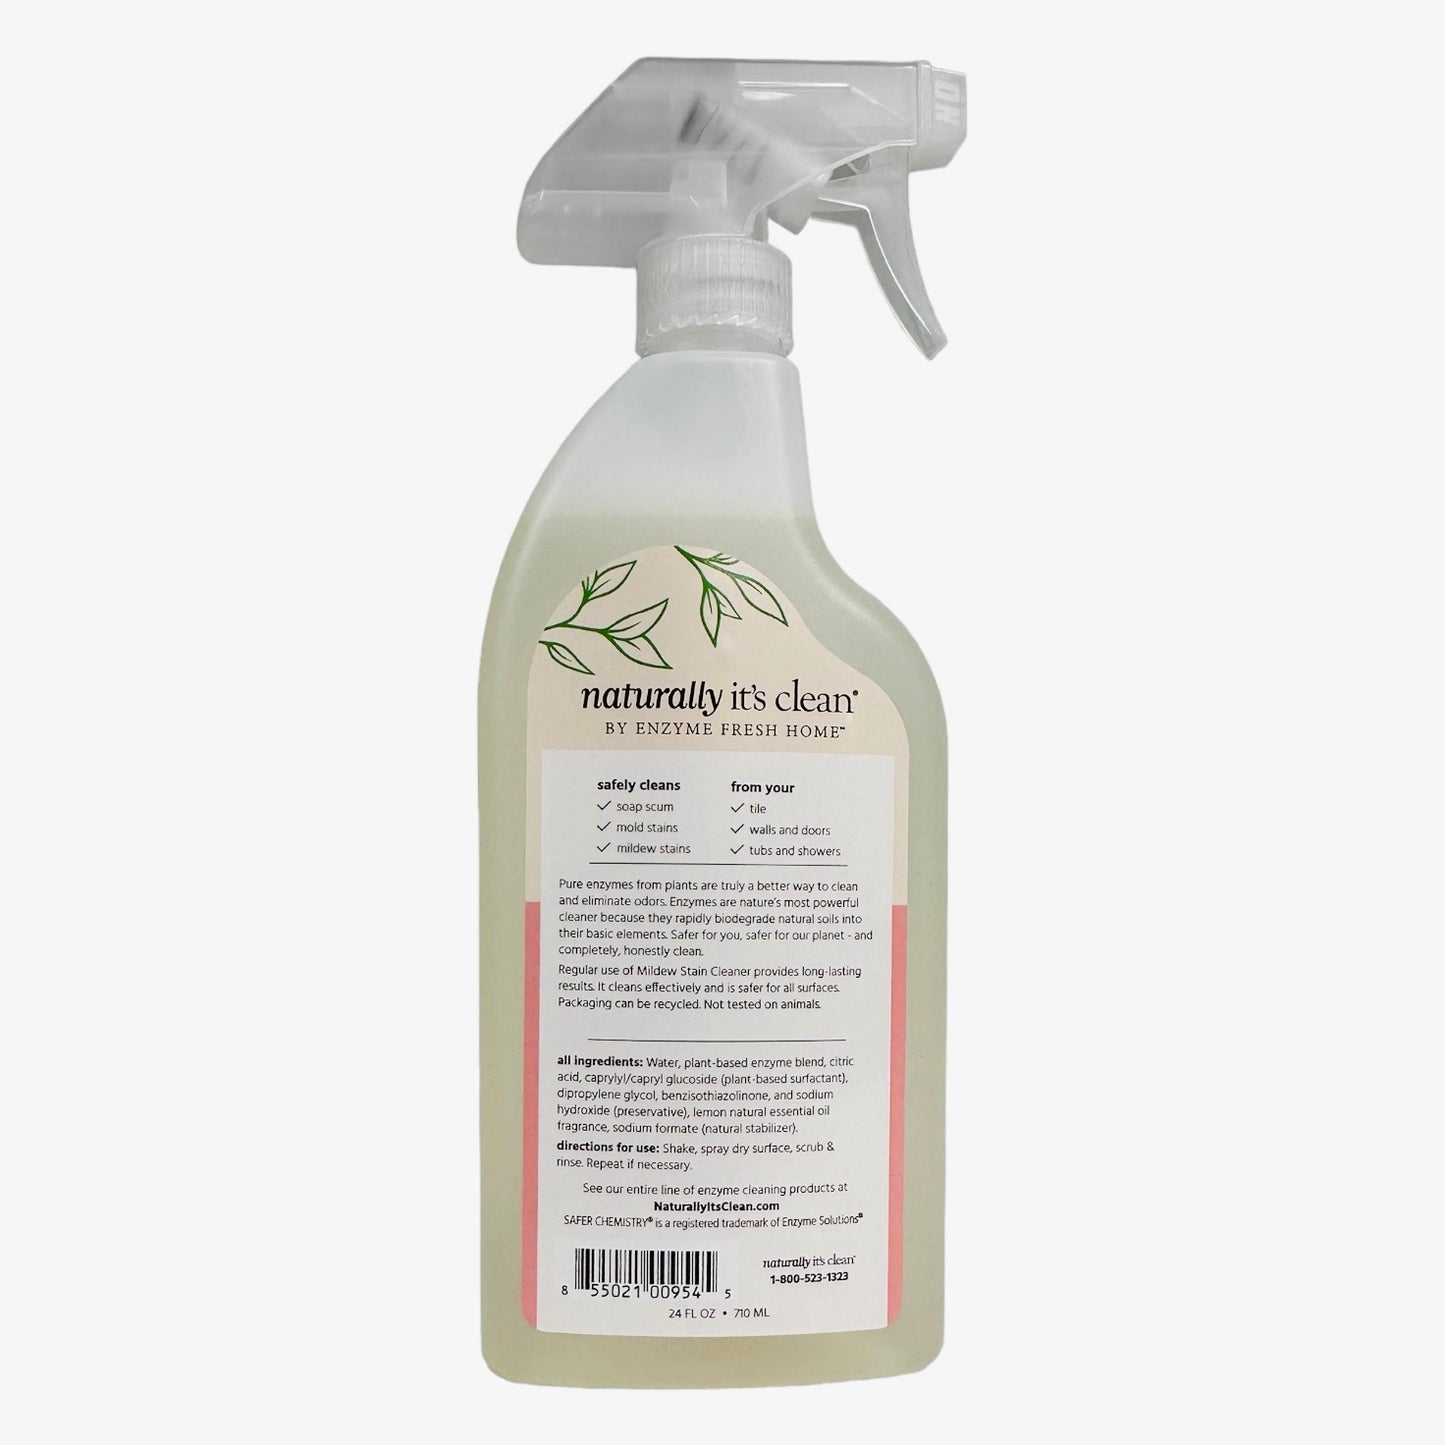 Mildew Stain Cleaner Ready-to-Use 24 oz